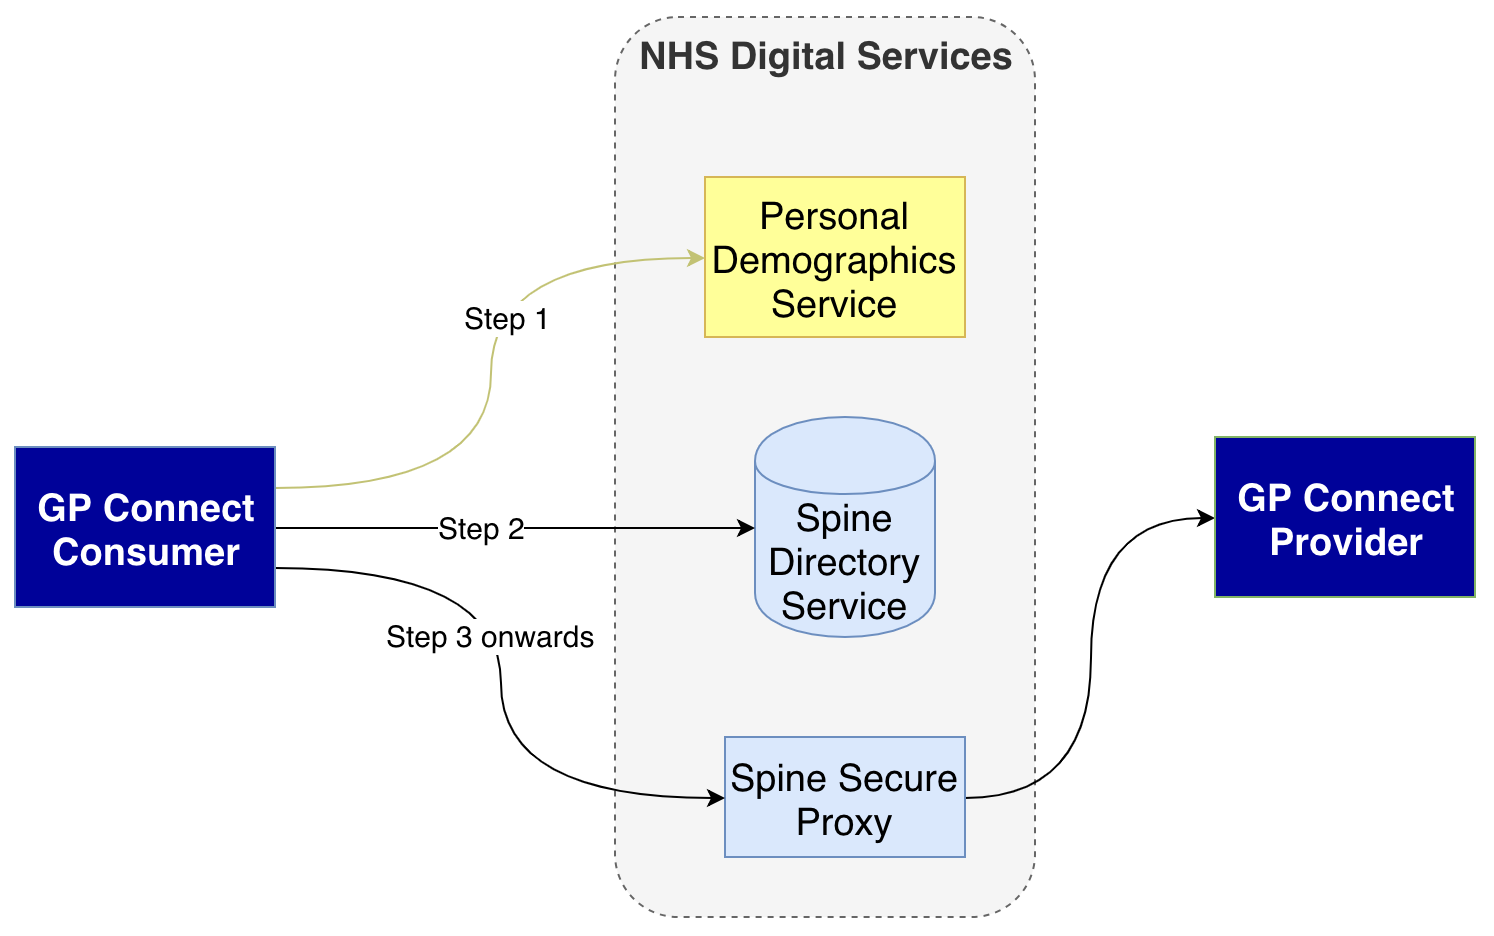 Diagram showing the high level three step flow for making GP Connect calls